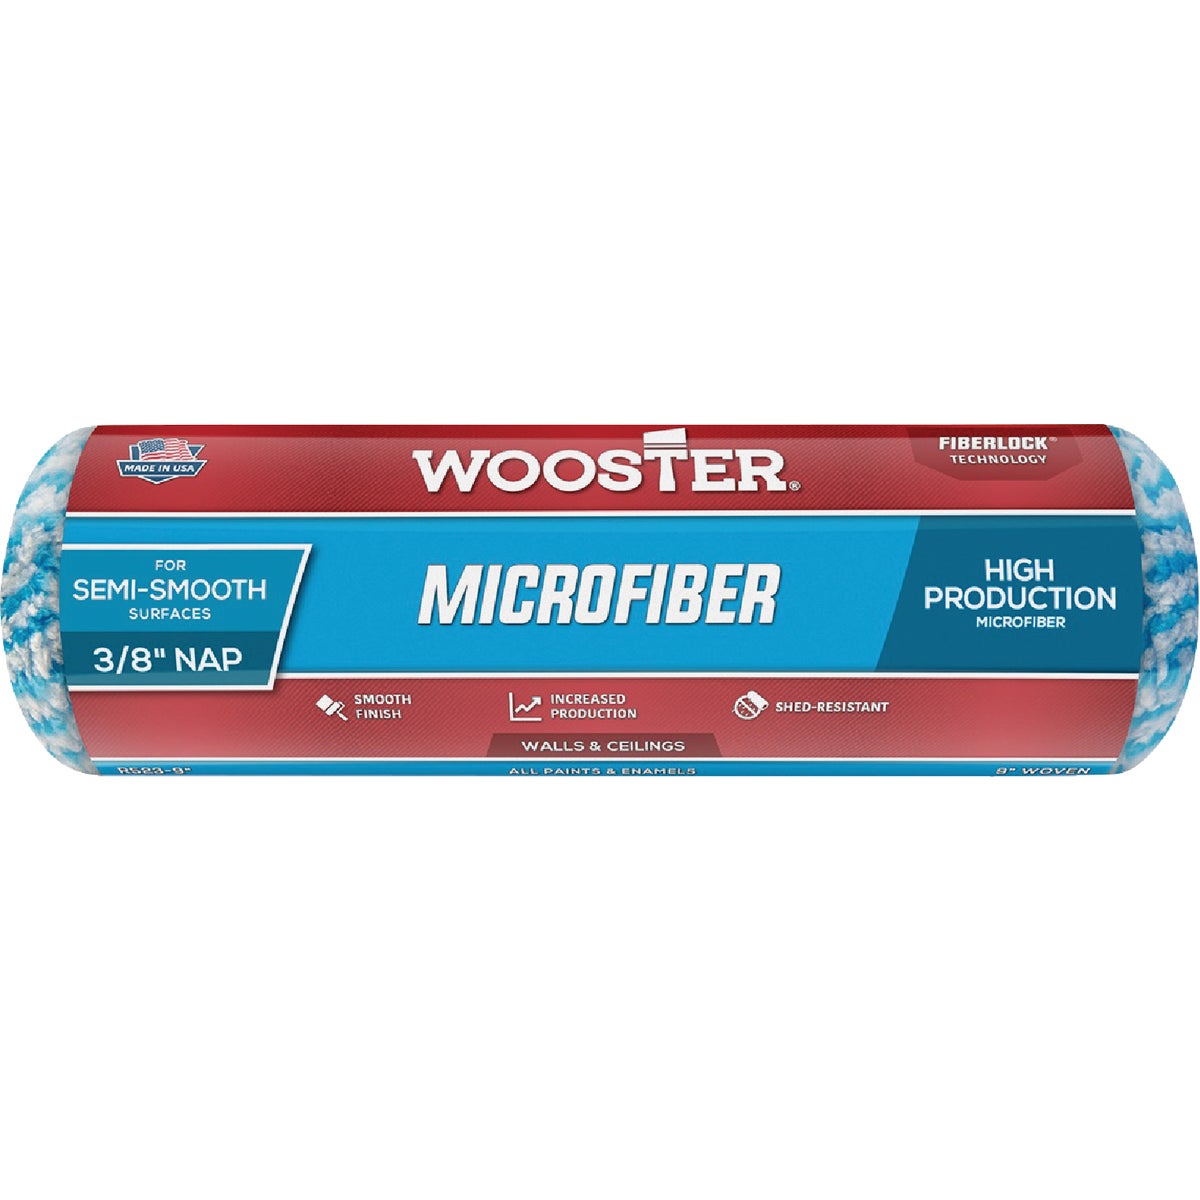 Wooster 9 In. x 3/8 In. Microfiber Roller Cover